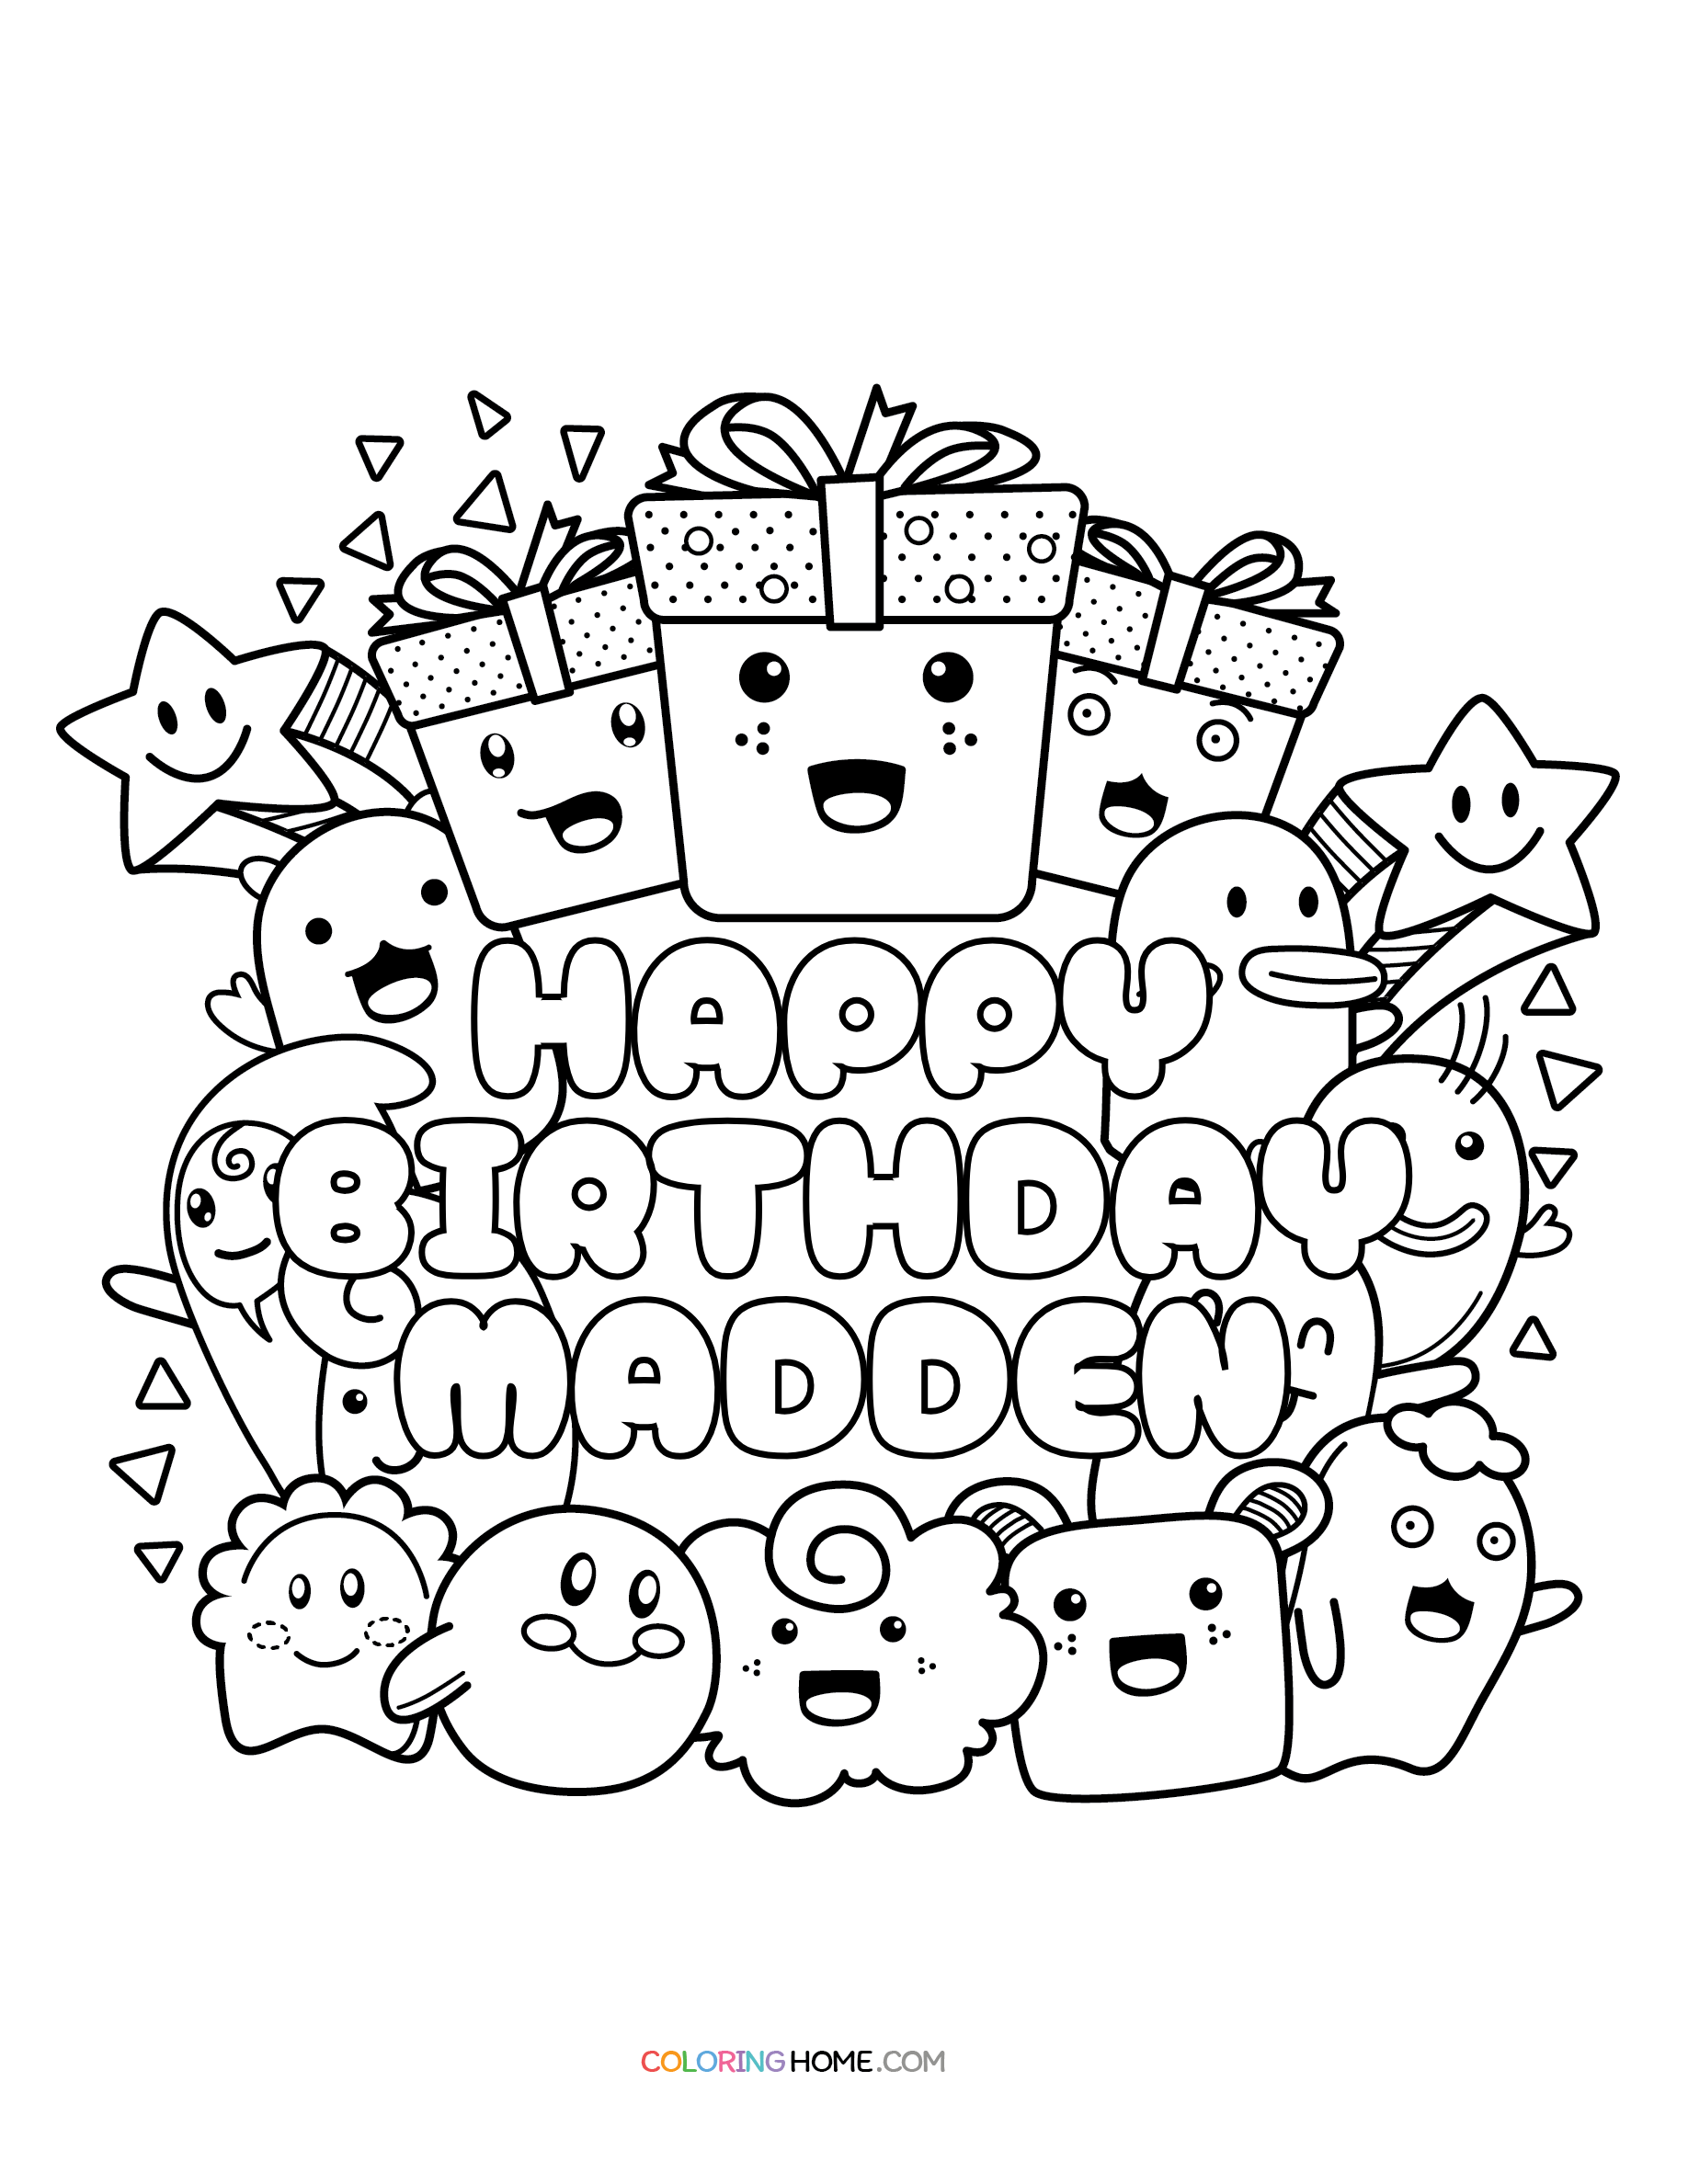 Happy Birthday Madden coloring page